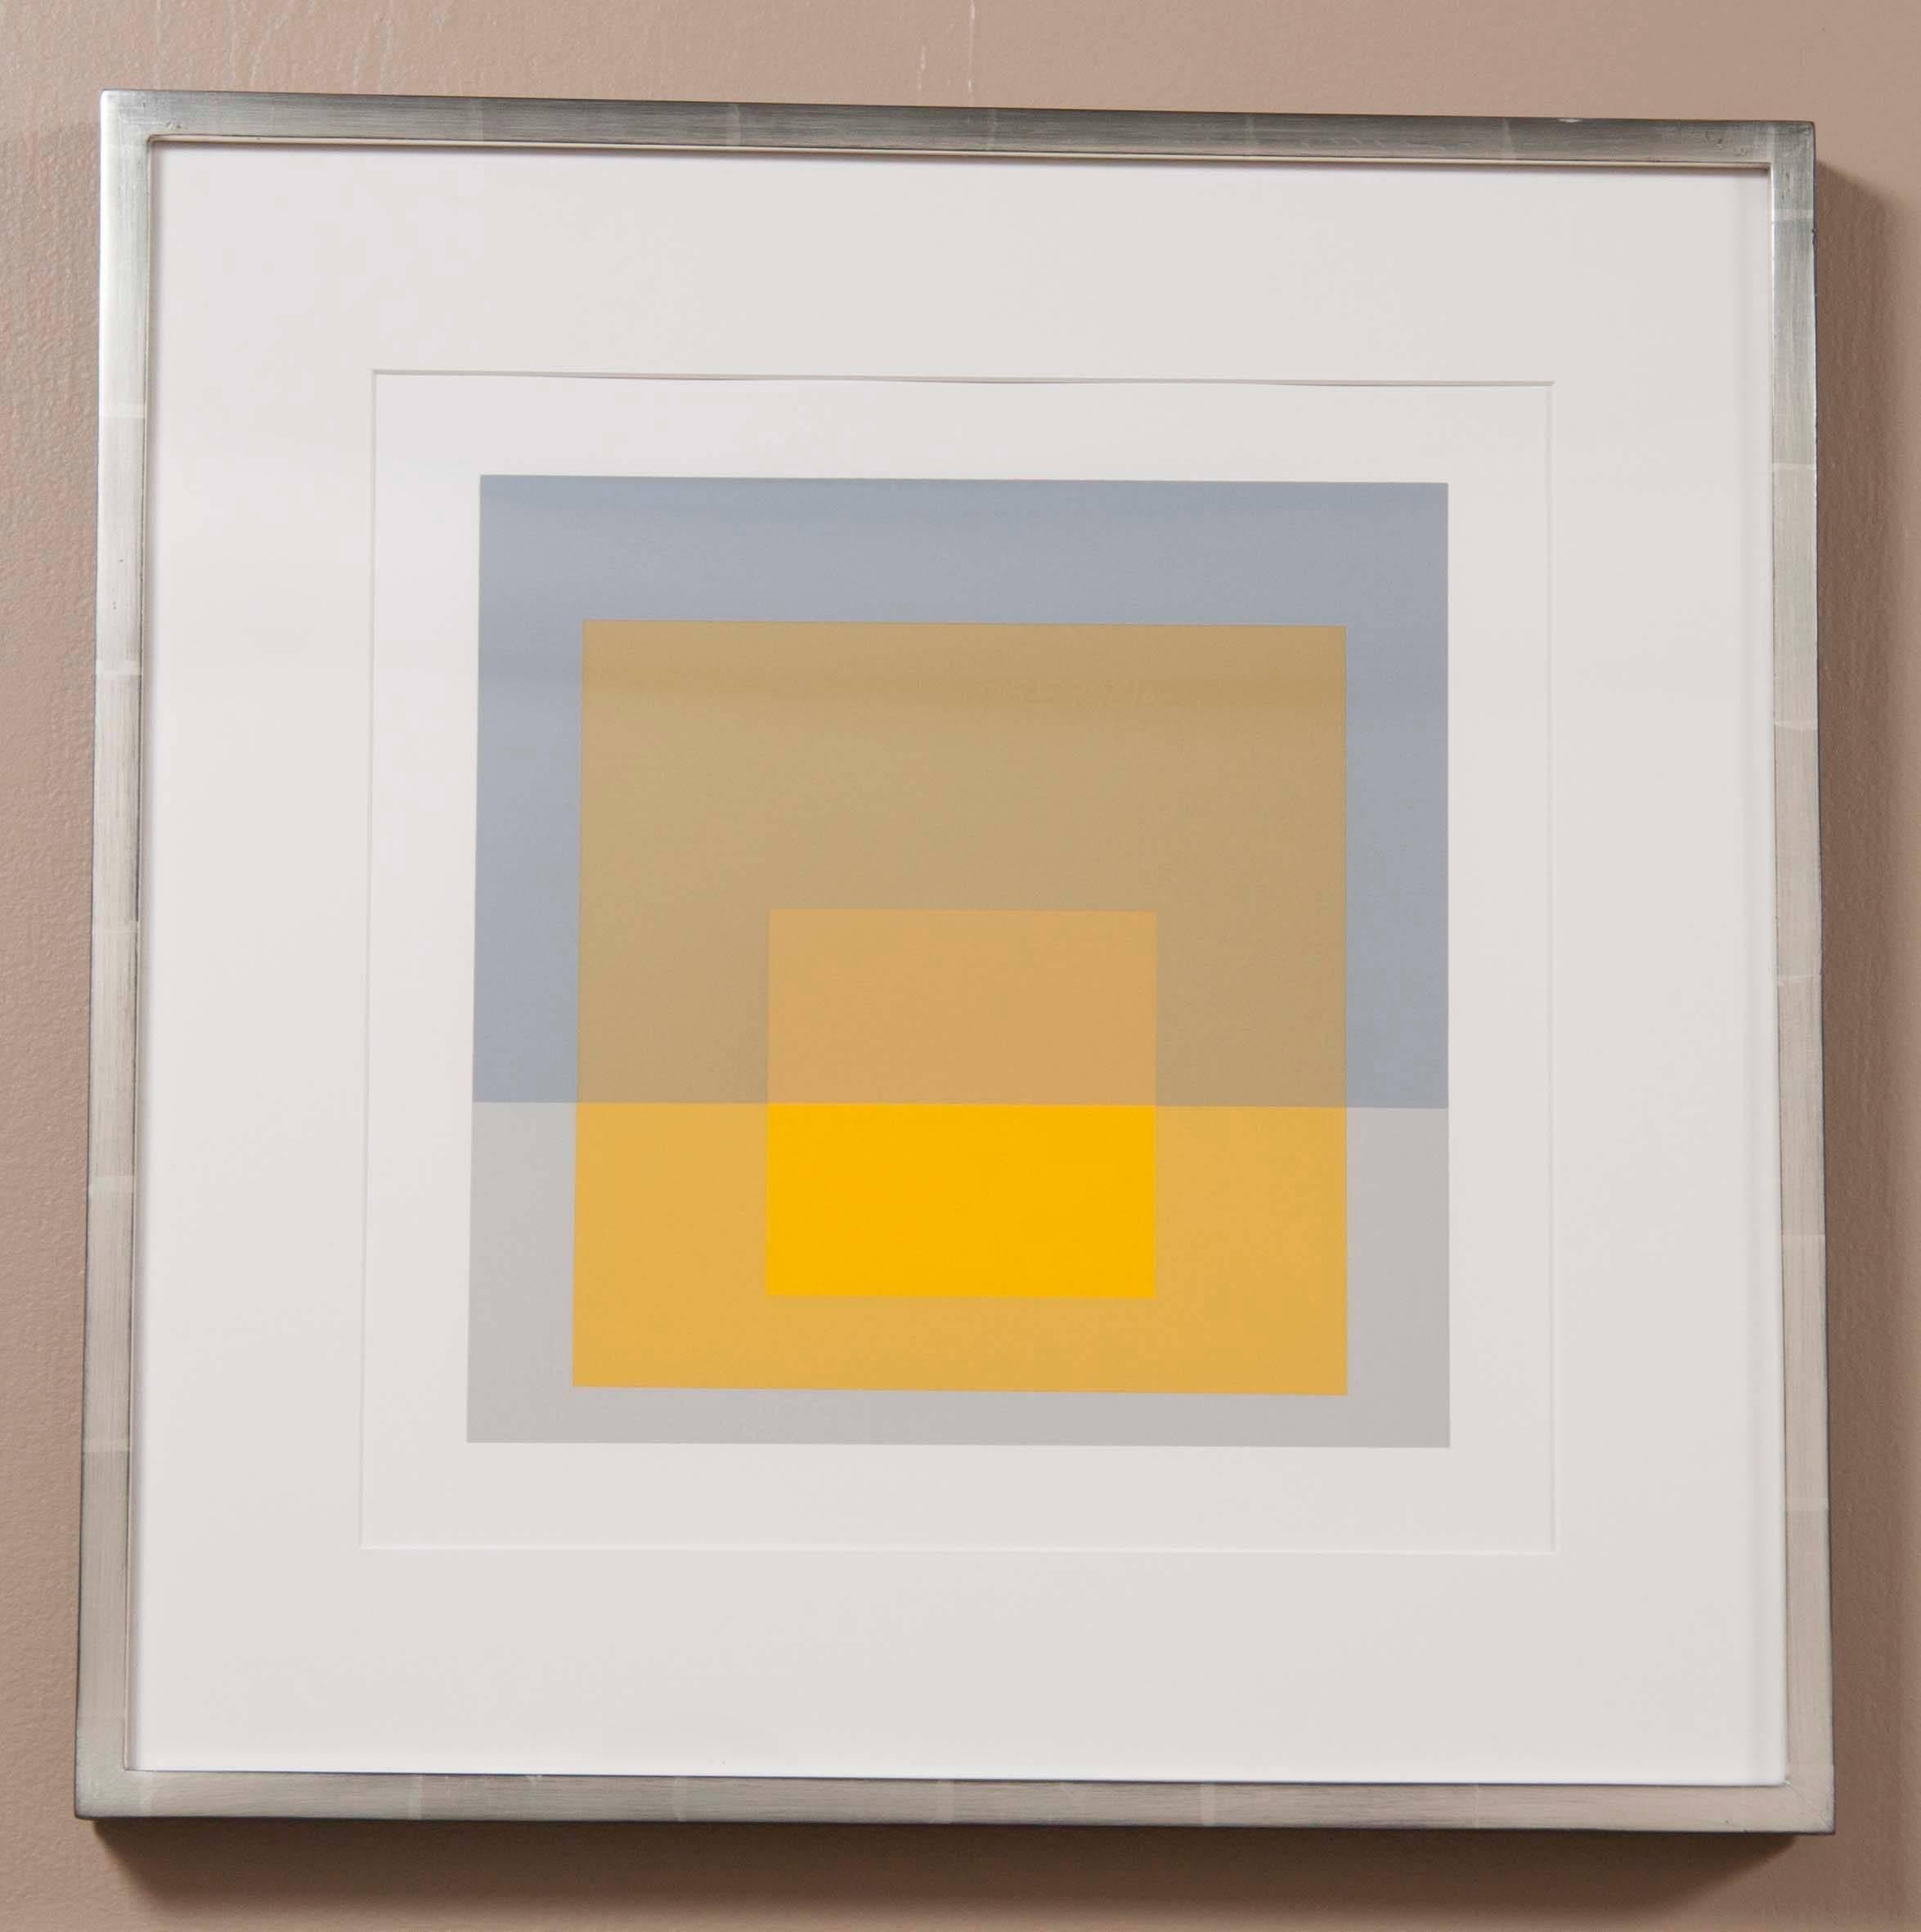 Josef Albers homage to the square from formations: Articulation 1972. Silkscreen prints matted in 12 karat white gold frame using all acid free archival materials. #176 of 1000 printed.
Printed by Sirocco screen printing, New Haven.
Published by